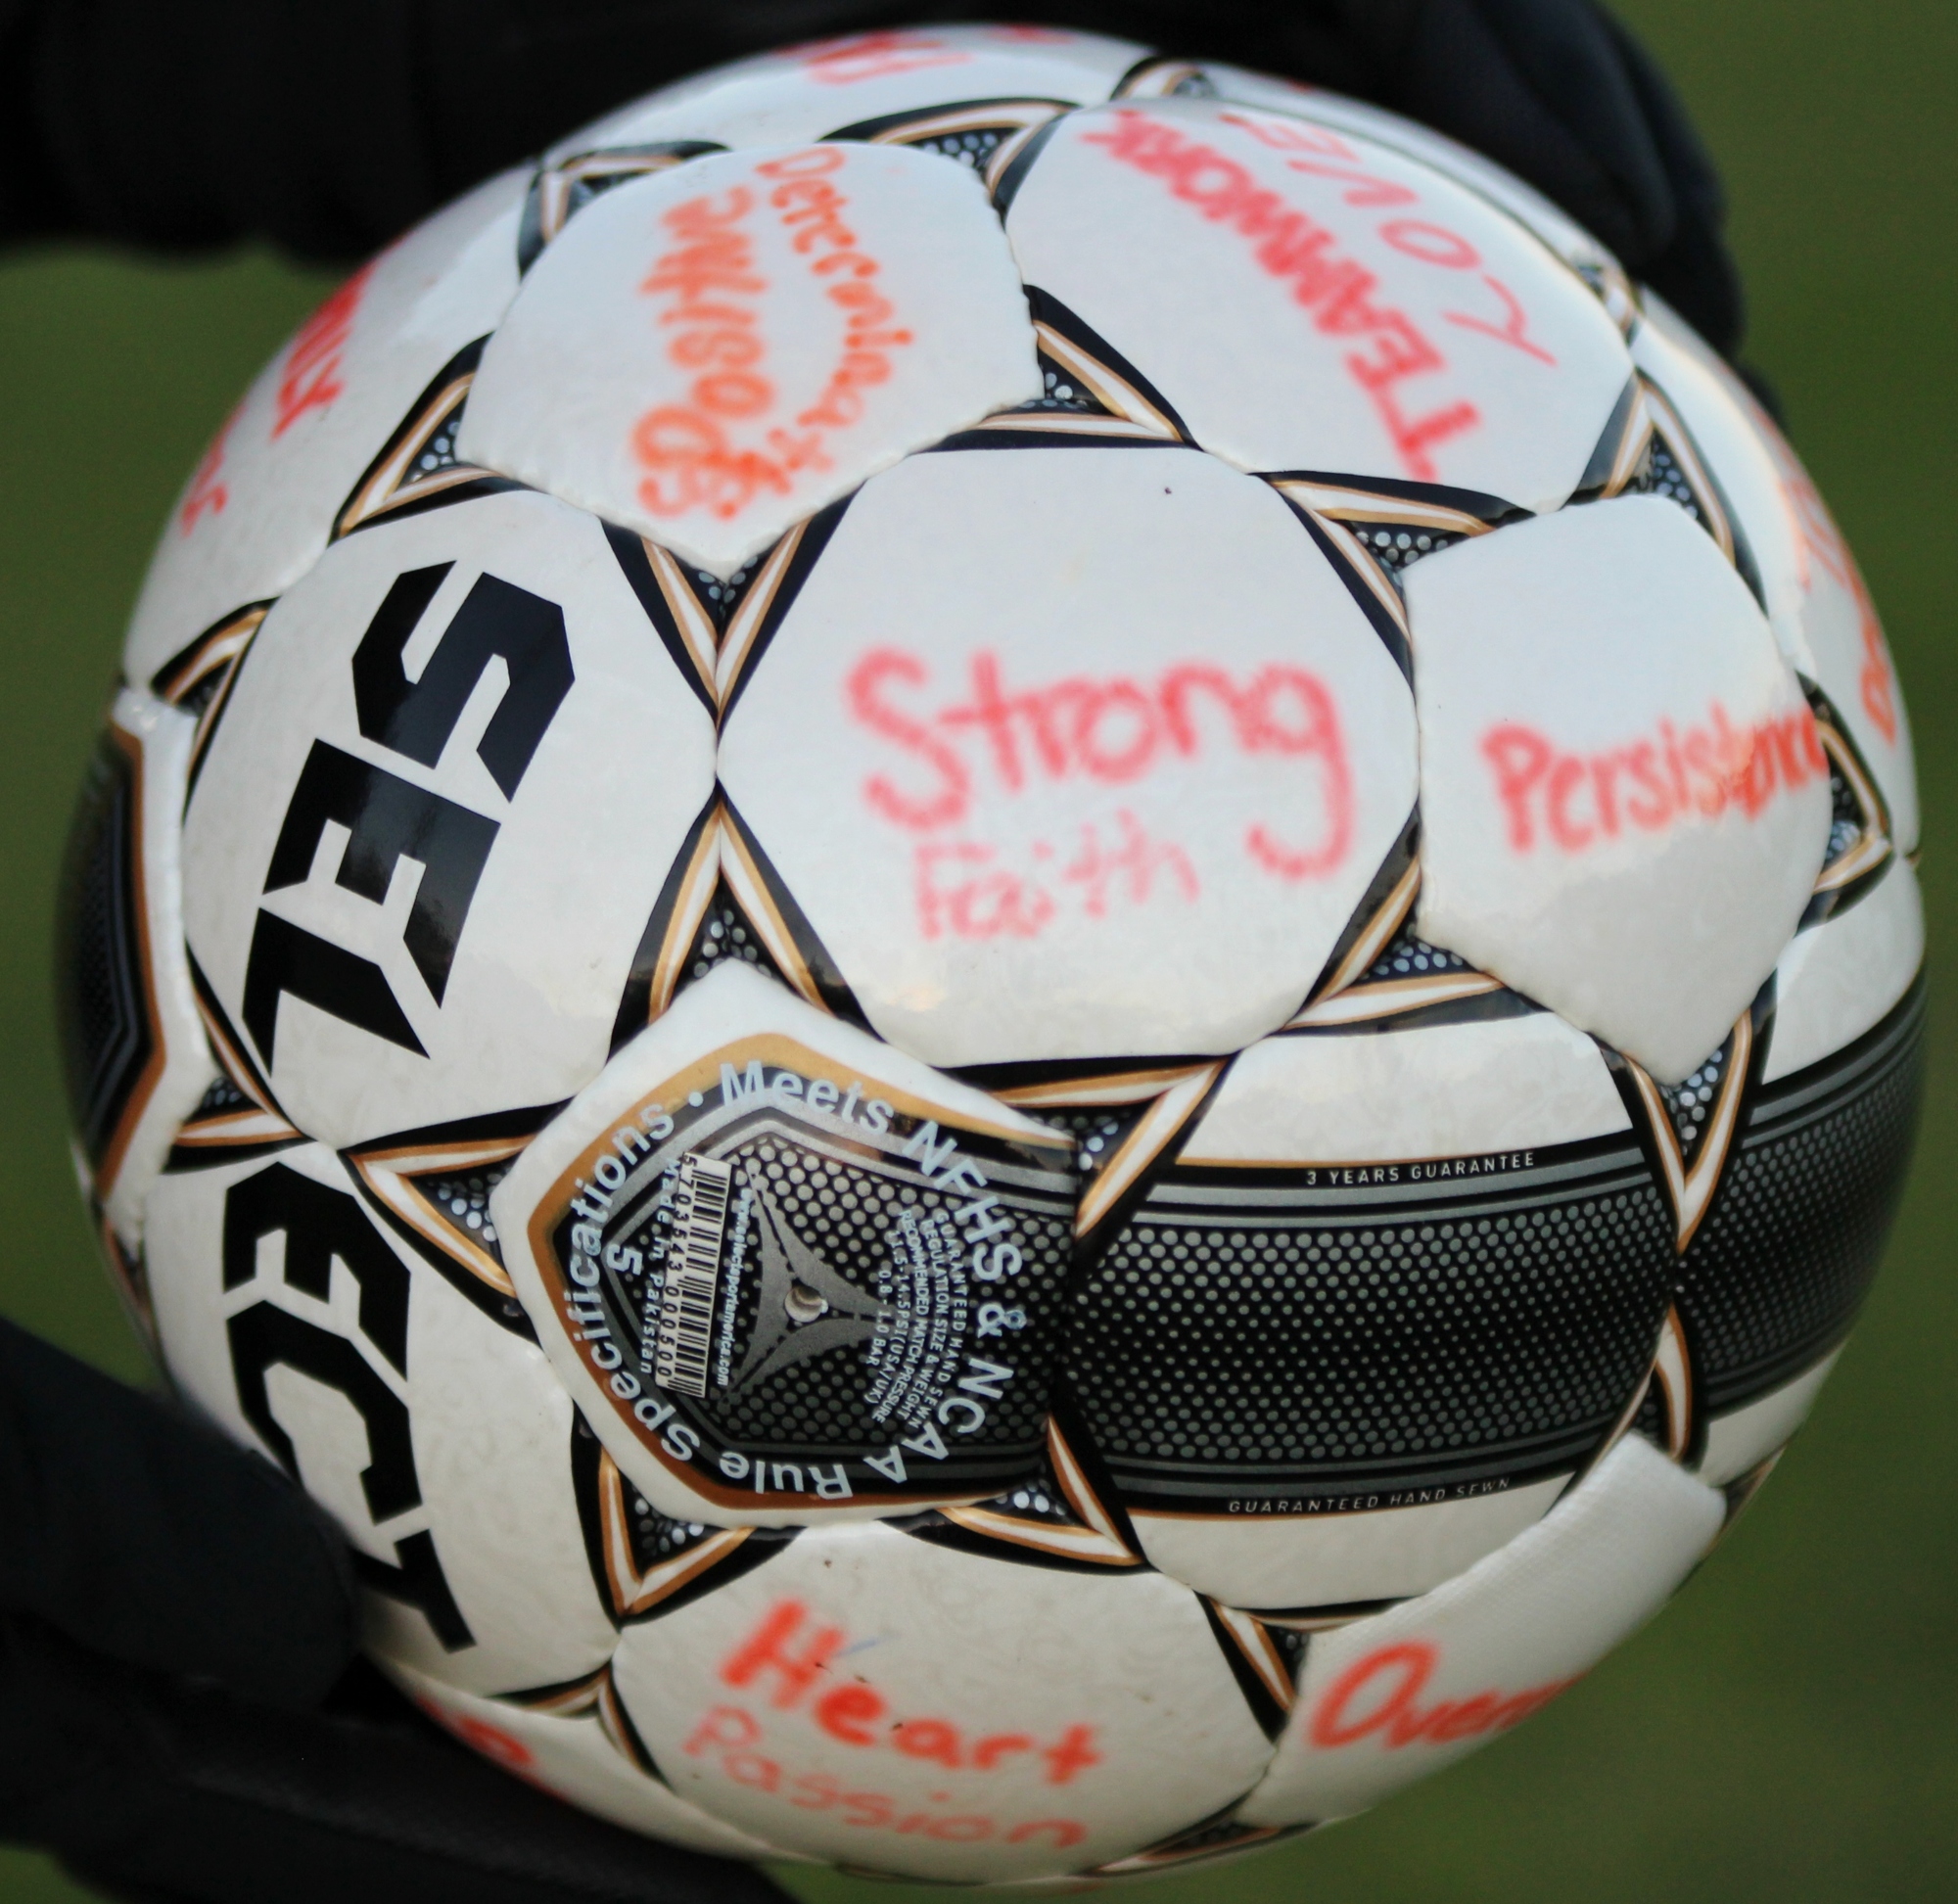 Before the season, every player wrote a meaningful word on their spirit ball, which is carried by coach Kim Merkel throughout each game, never allowing it to touch the ground. They will use one of these words to do the team breakdown before the game.